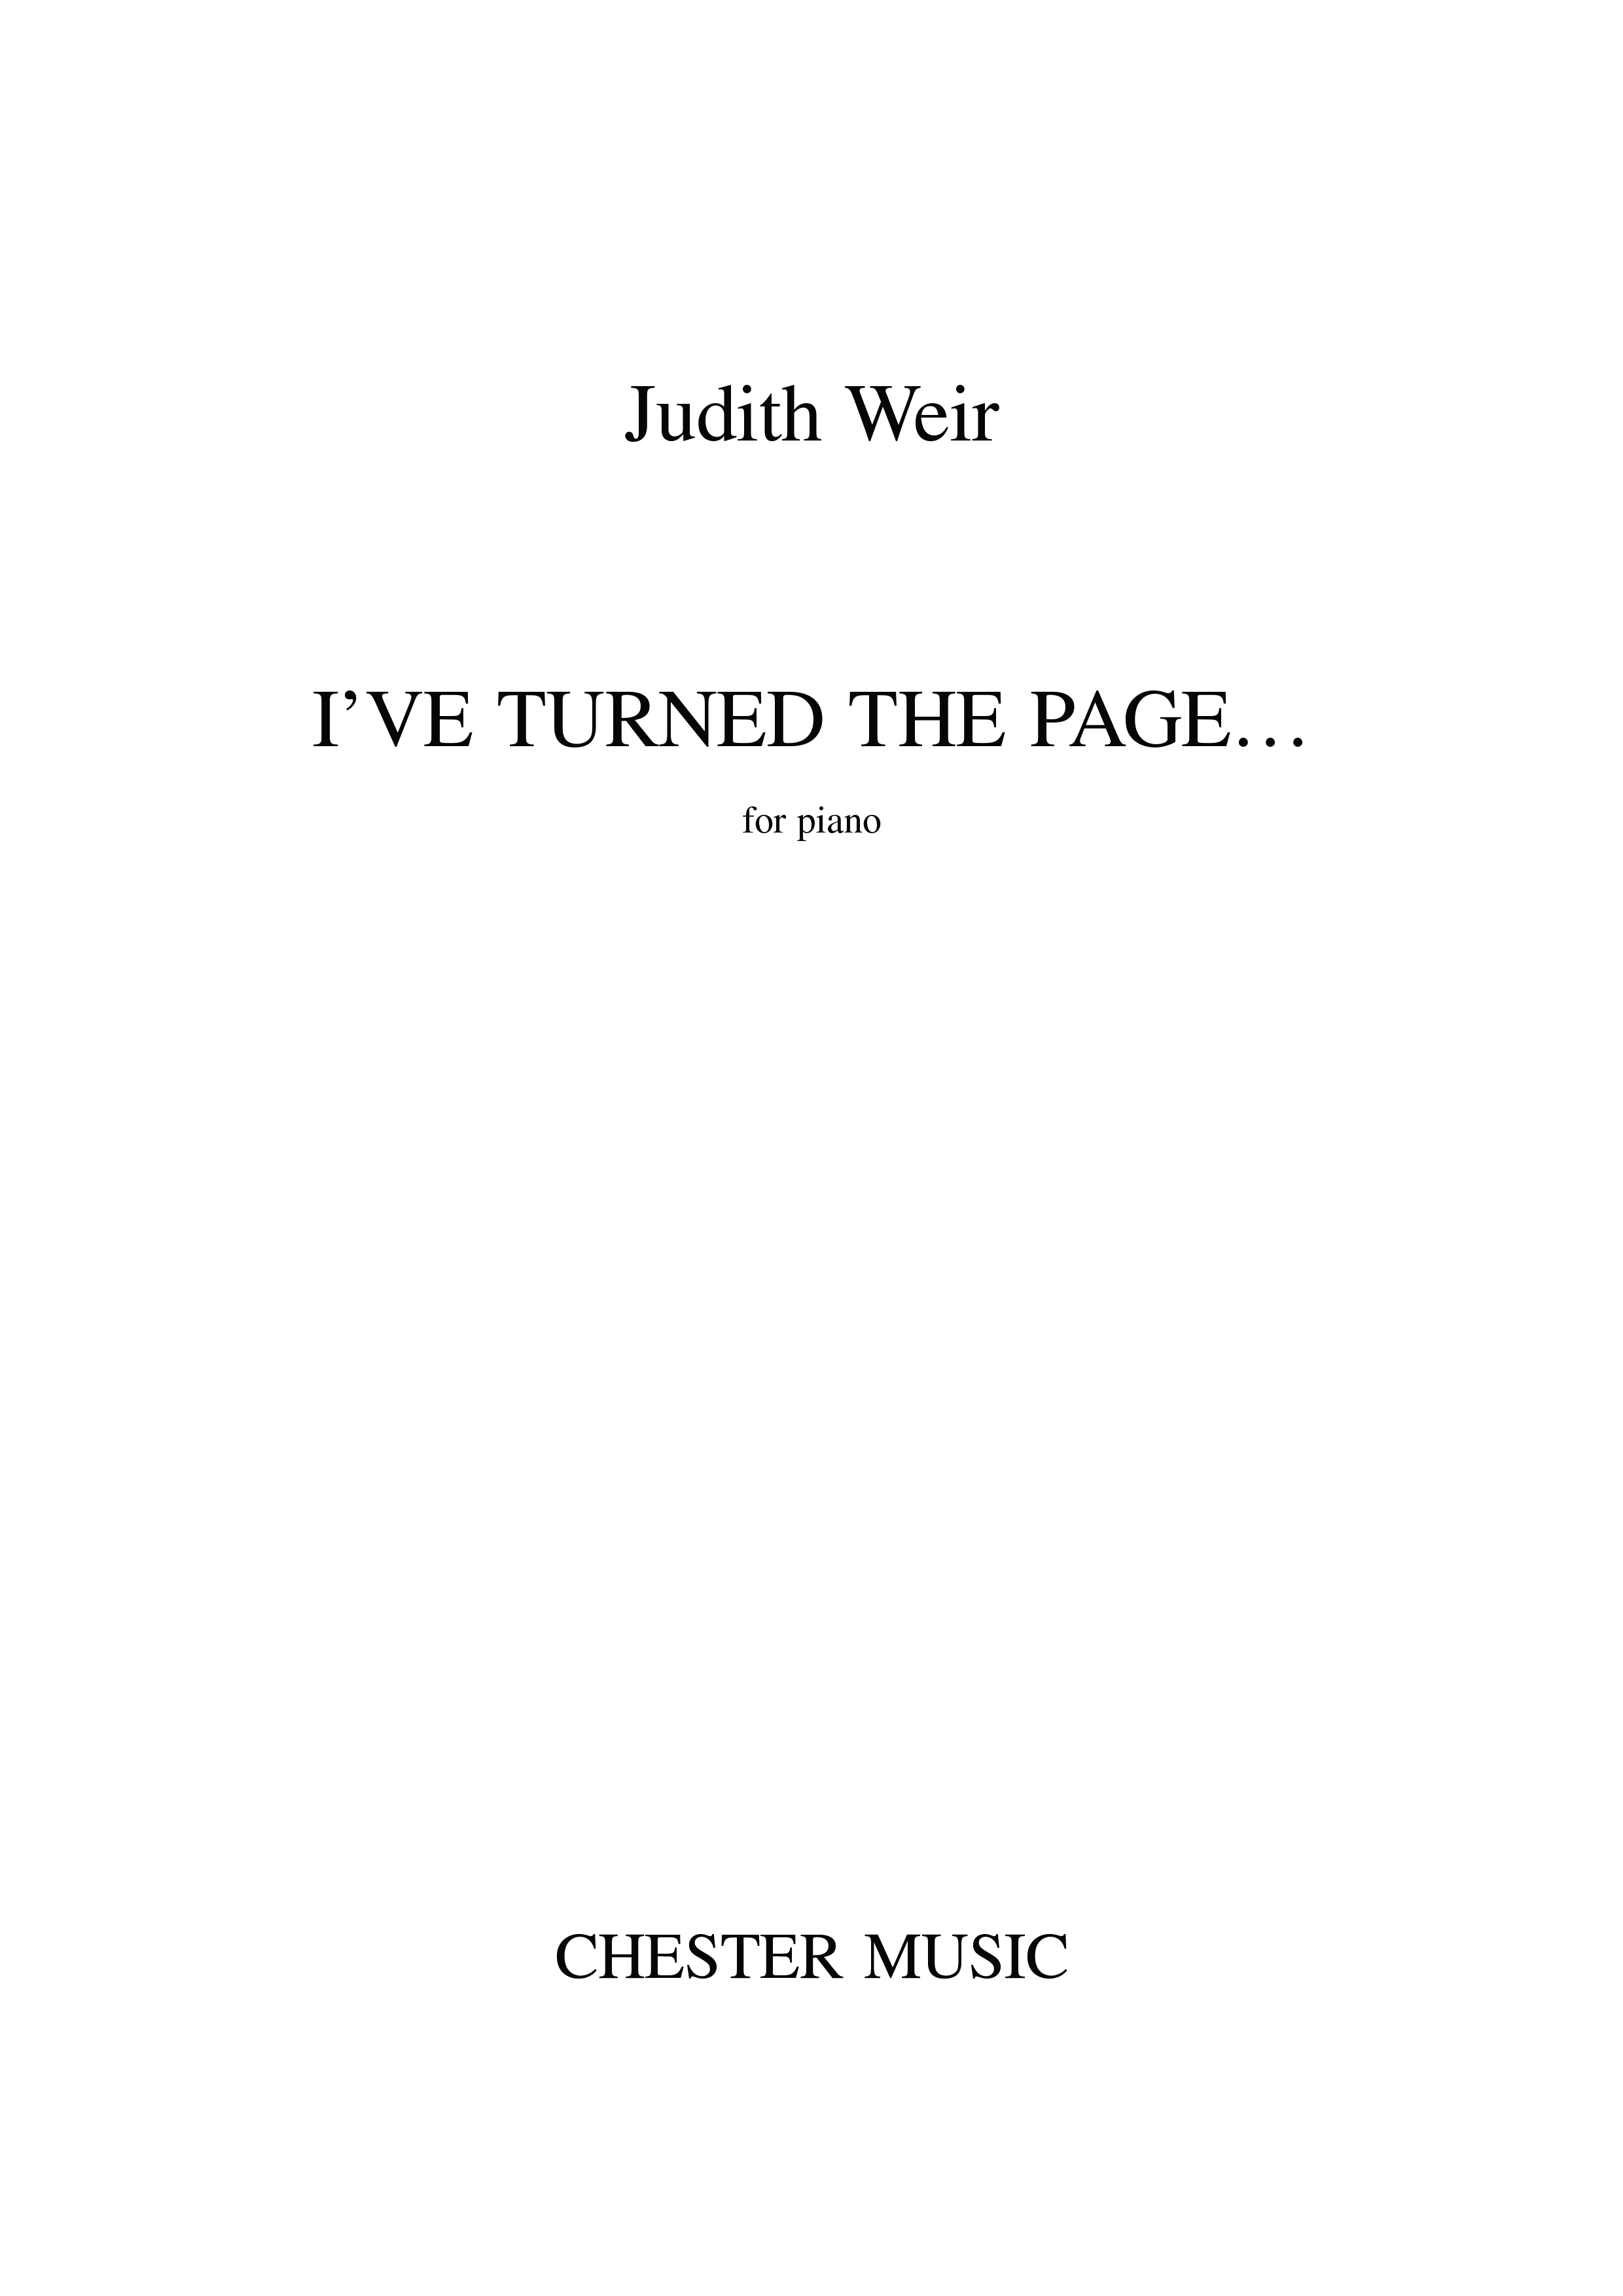 Judith Weir: I've Turned The Page...